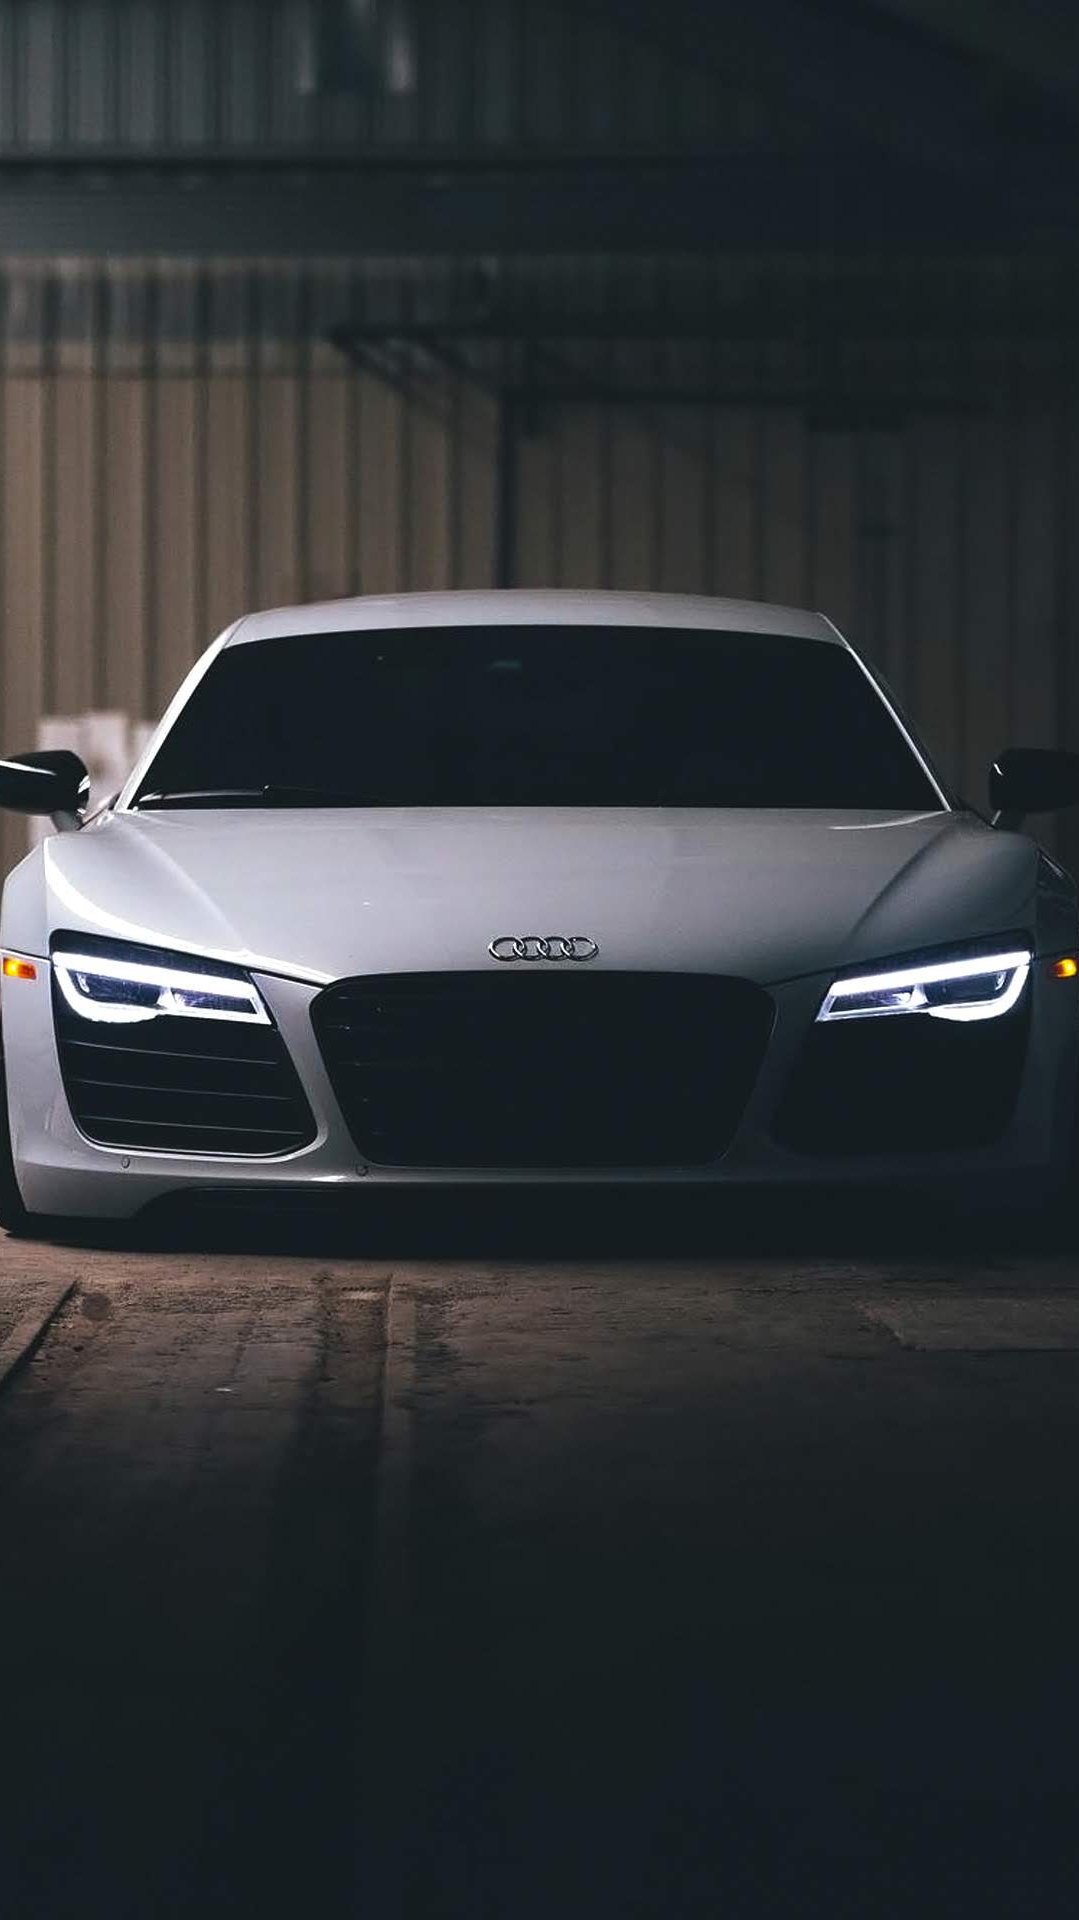 Audi R8 White IPhone Wallpaper - IPhone Wallpapers : iPhone Wallpapers